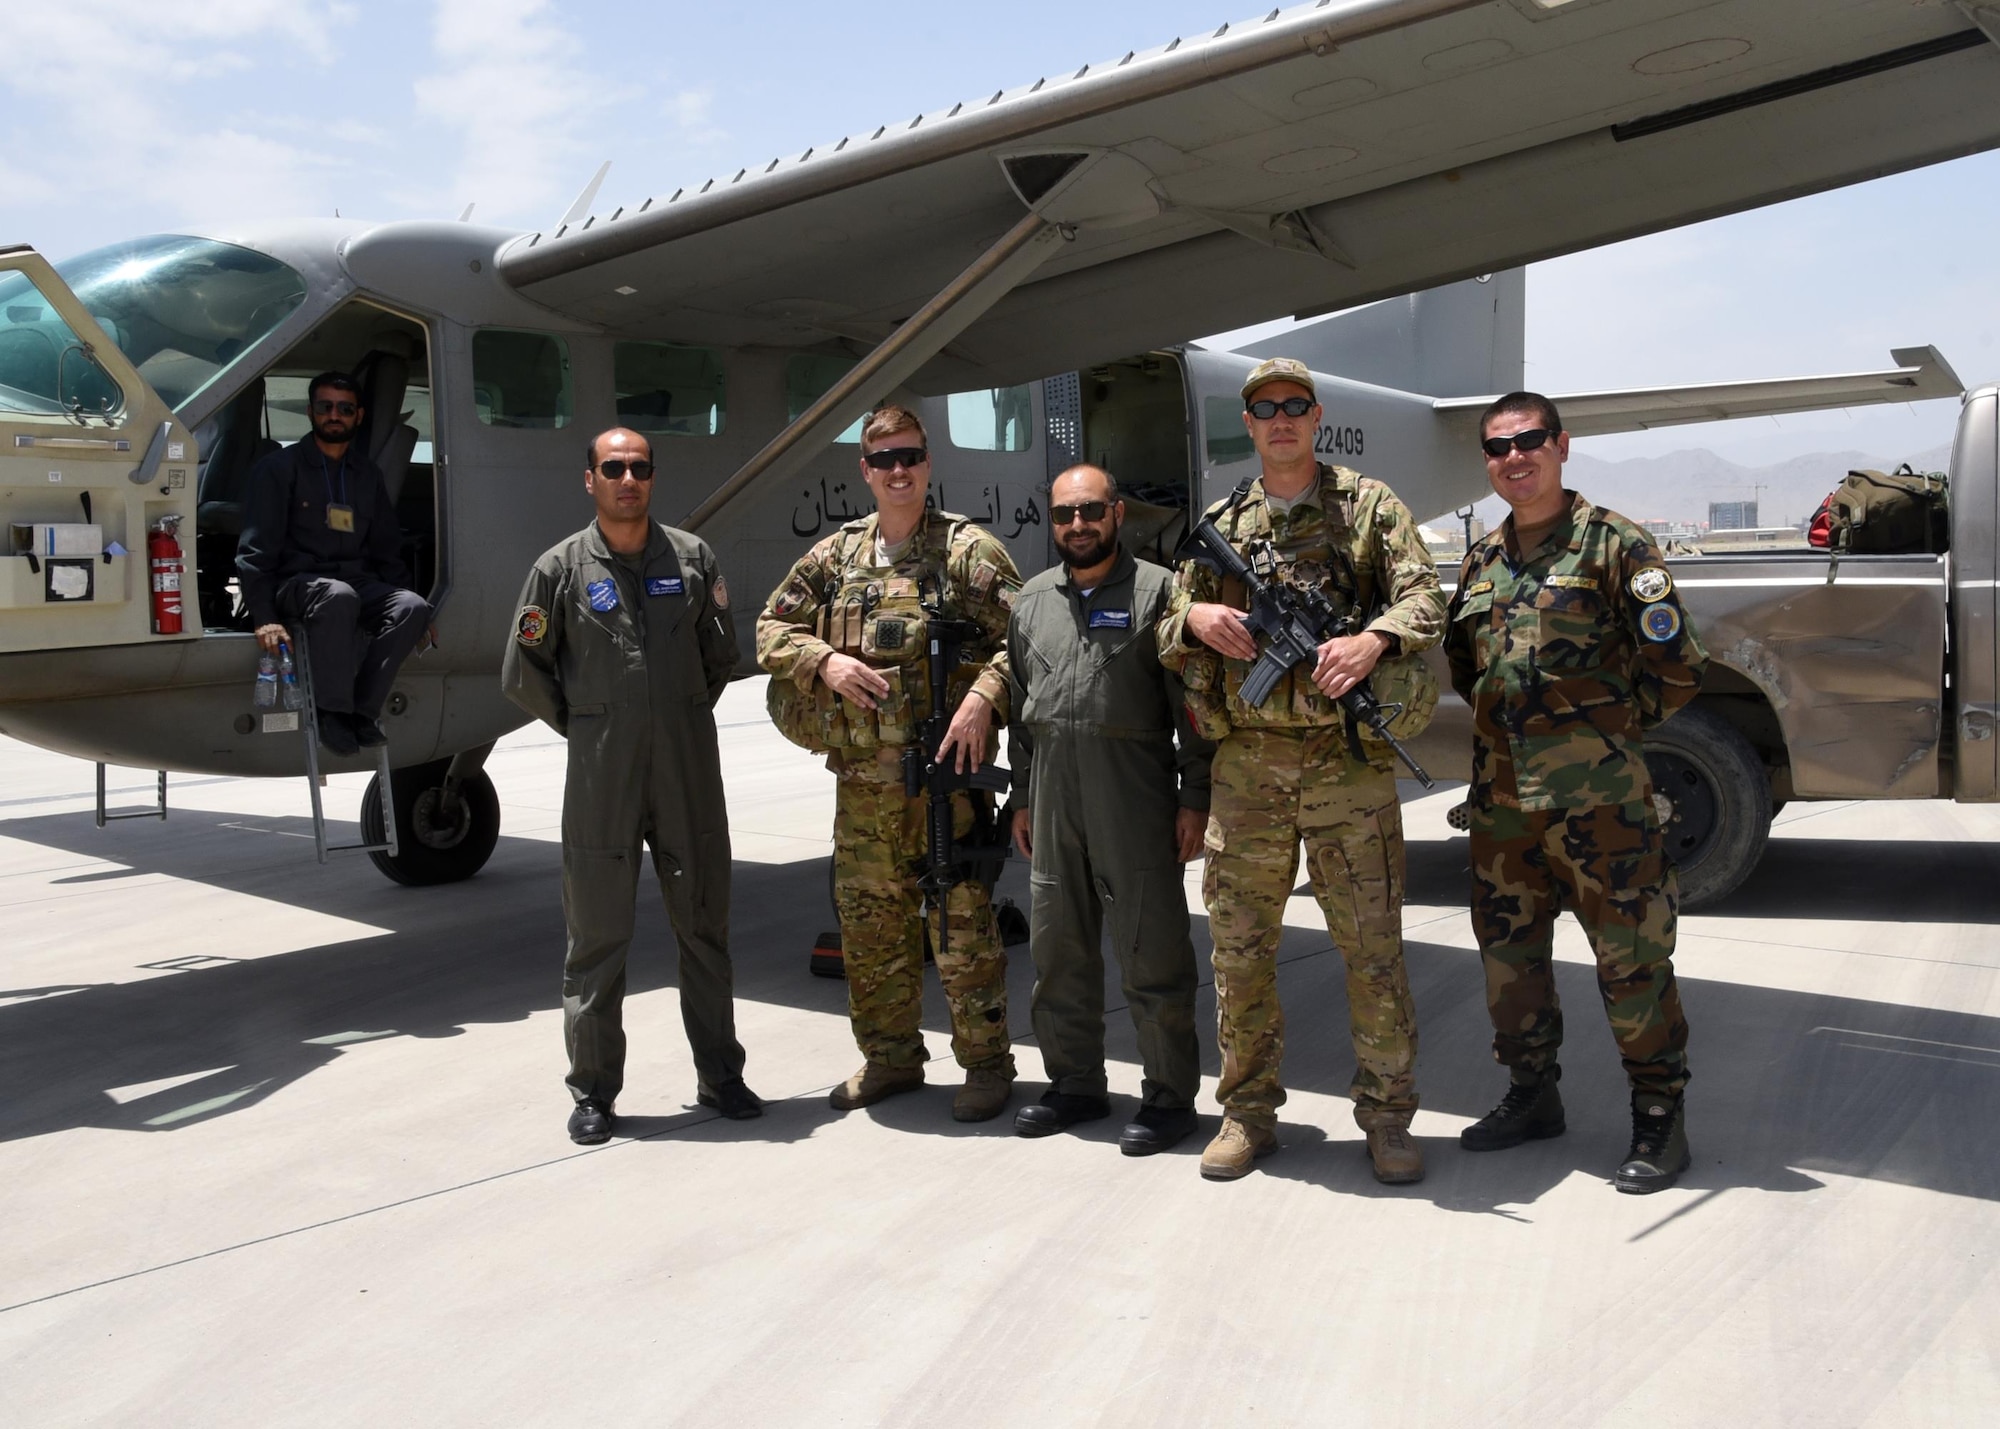 Afghan Air Force C-208 aircrew and maintenance members pose for a photo with Train, Advise, Assist Command-Air, 538th Air Expeditionary Advisory Squadron C-208 advisors, after delivering supplies to Afghan National Defense Security Forces ground troops on June 28, 2017. This was the first operational airdrop performed by AAF aircrew. The AAF successfully delivered 800 pounds of supplies to Afghan Border Police at their coordinated drop zone. (U.S. Air Force photo by Tech. Sgt. Veronica Pierce)